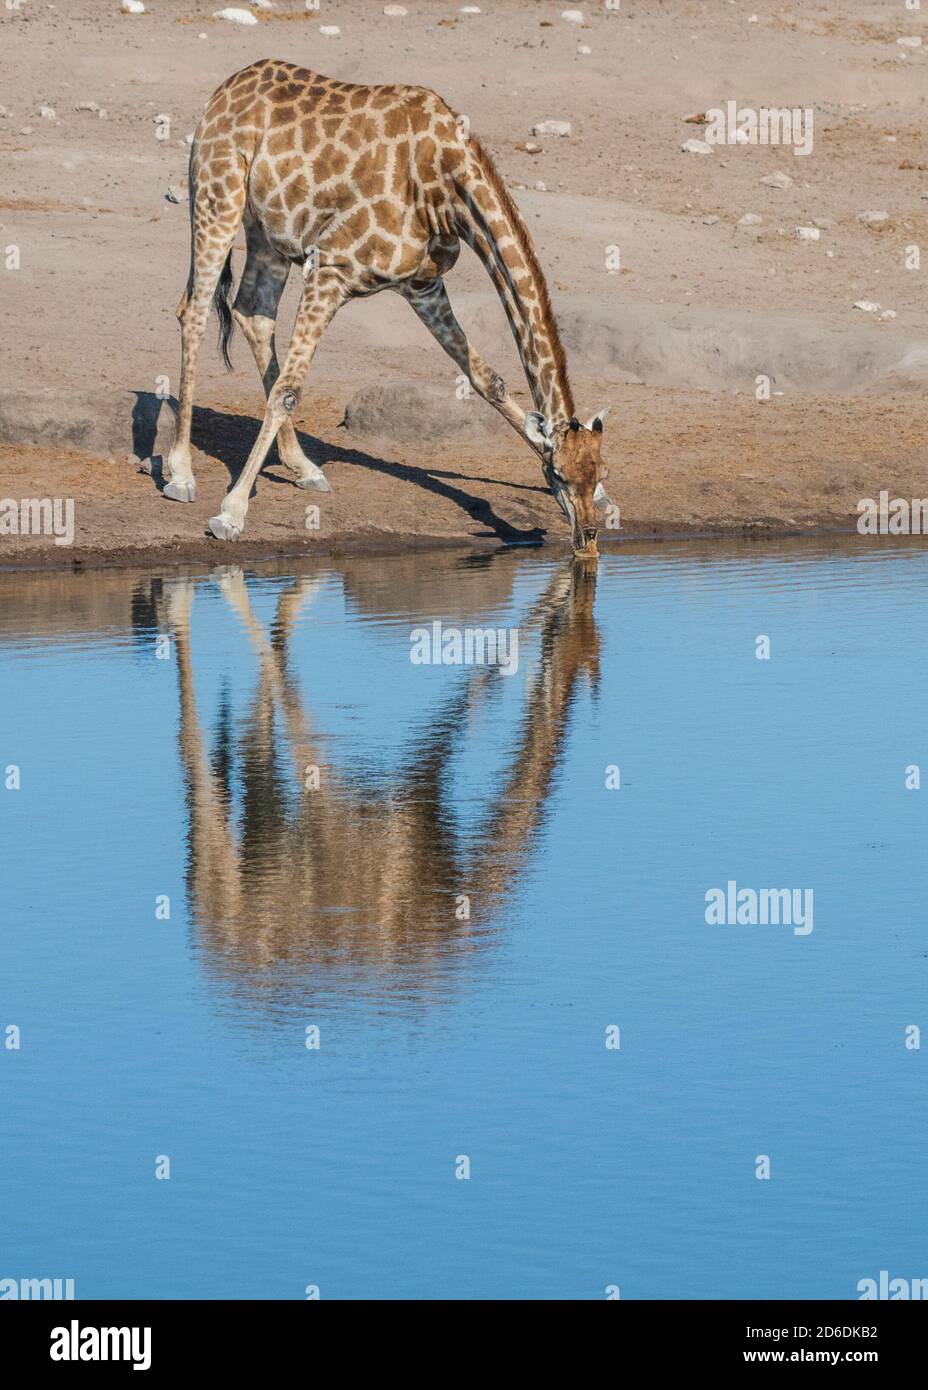 A jeep tour through Namibia, giraffe in the Etosha National Park, is reflected in the water while drinking Stock Photo